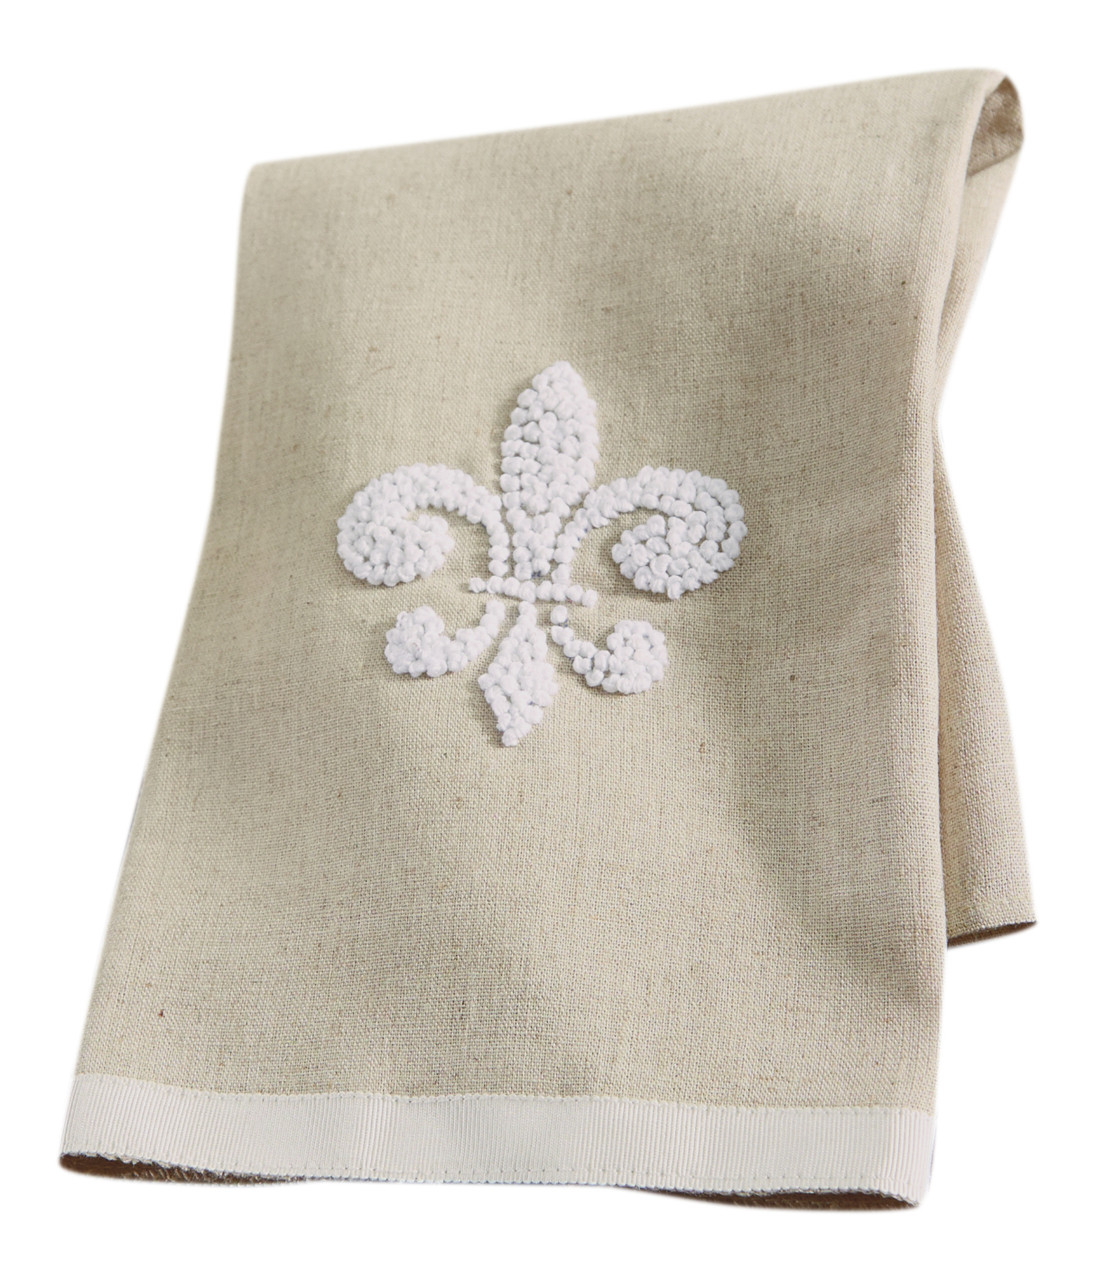 French Fleur de Lis Embroidered White Hand Towel